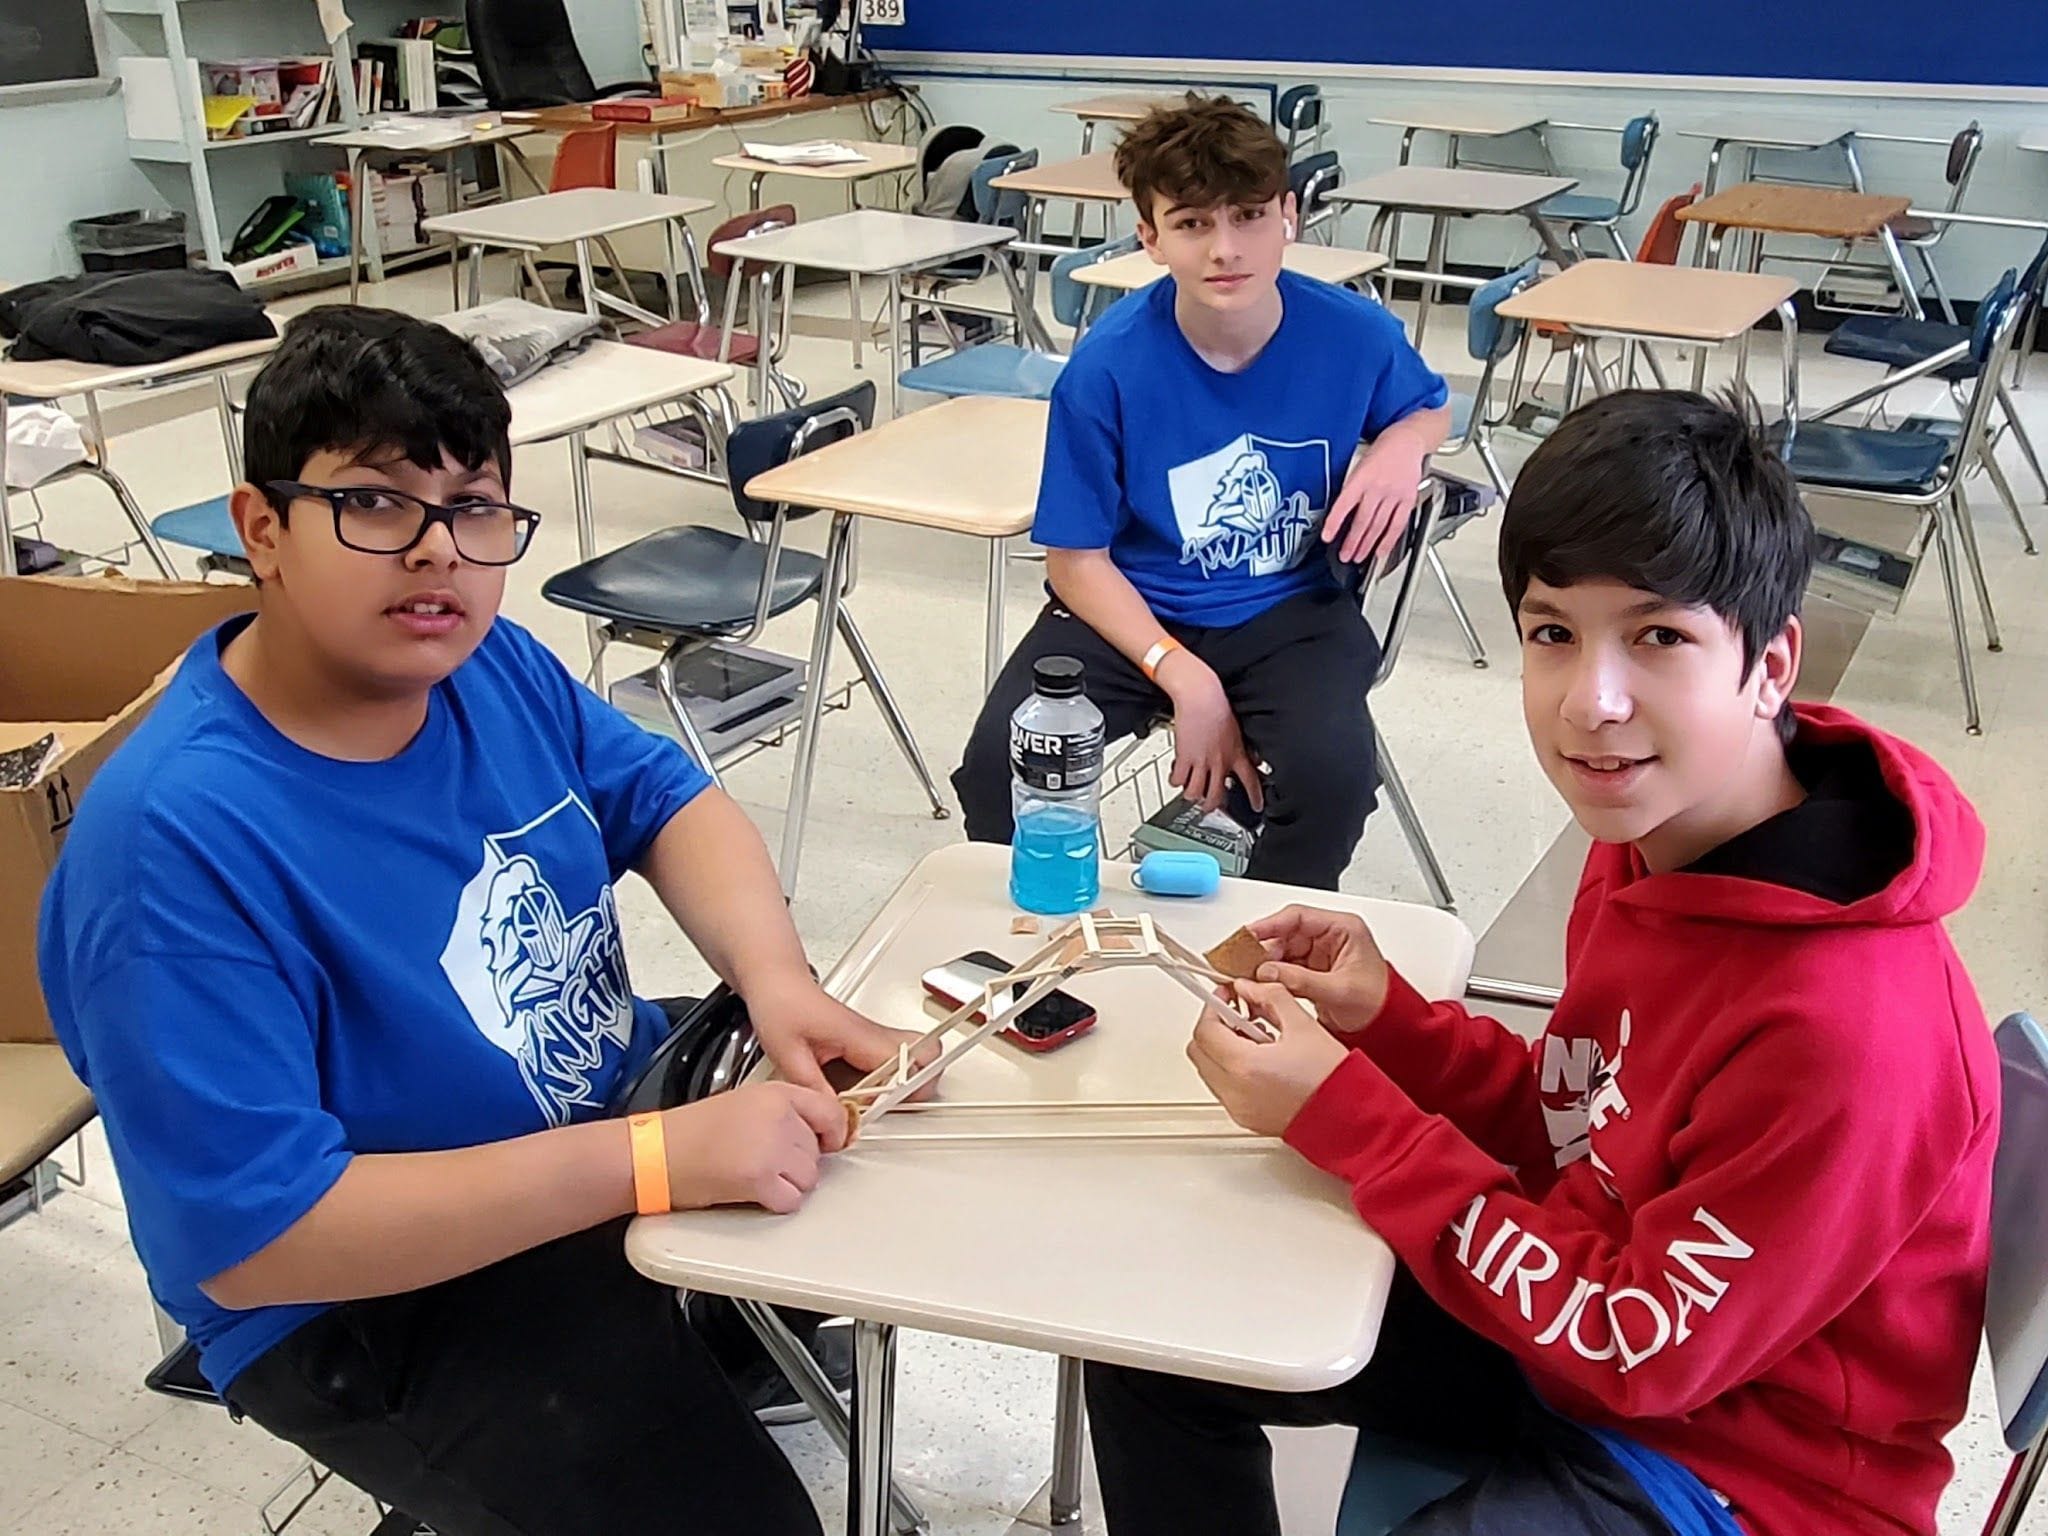 Elwood Middle School Earns Two Medals At Science Olympiad